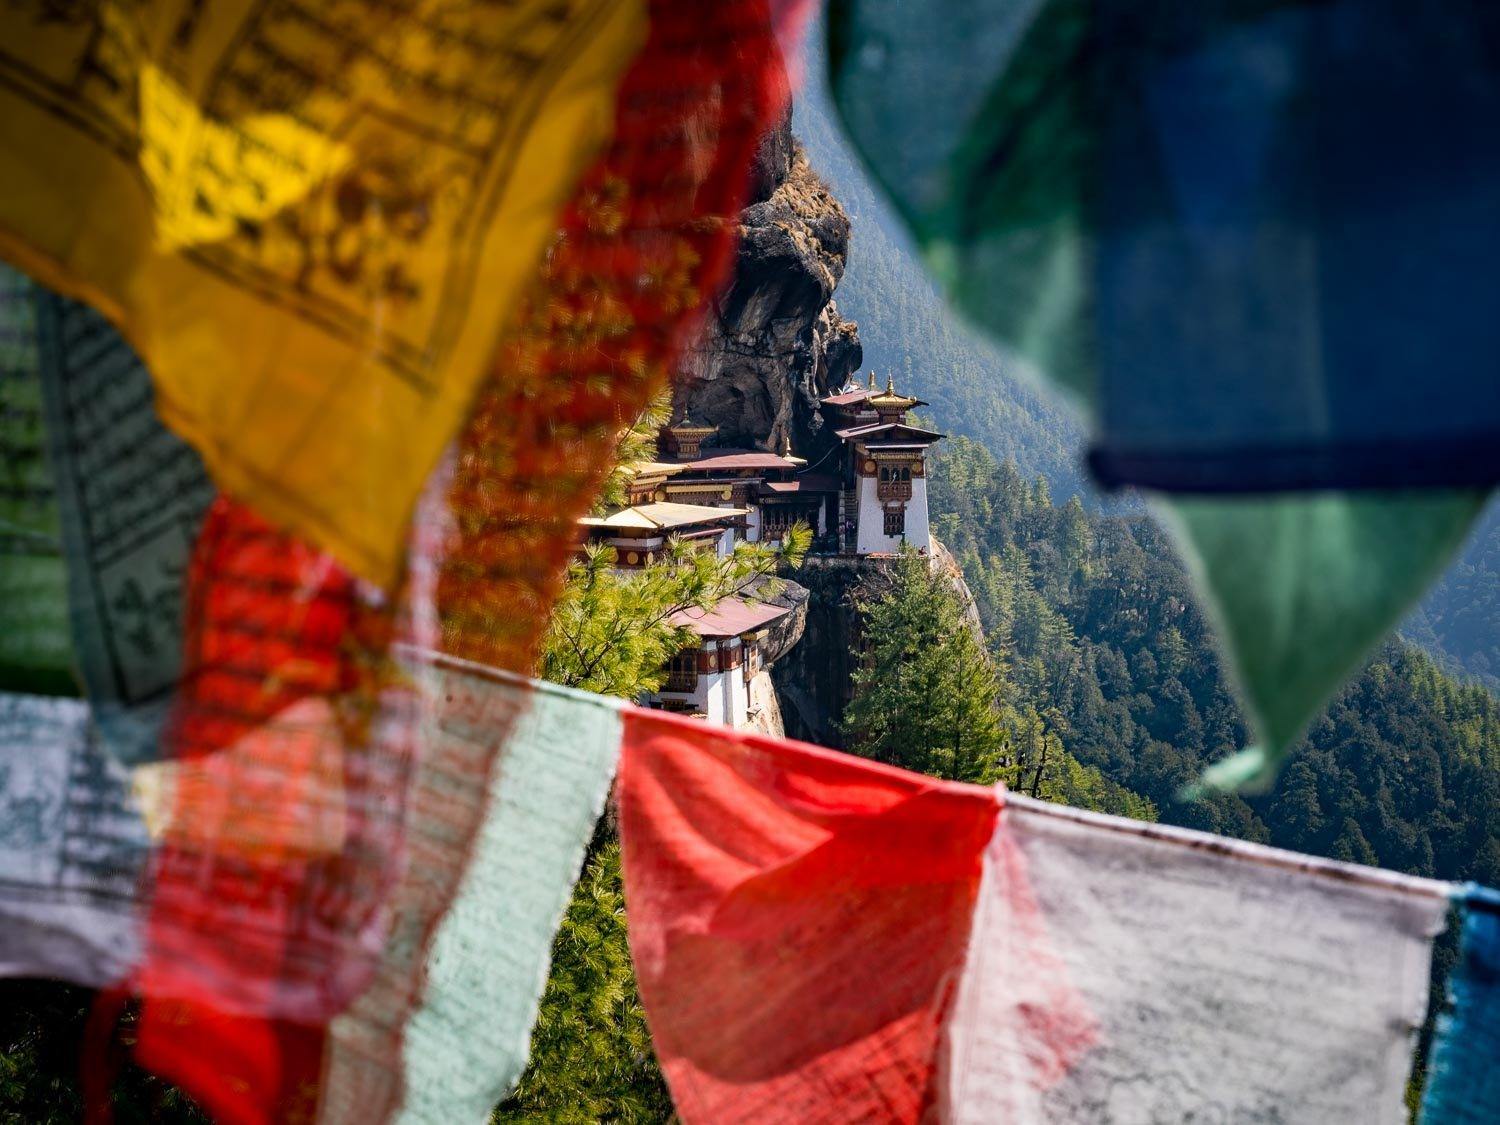 Prayers flags in a sequence and a high hill area behind, Tiger's Nest with Prayer Flags, Bhutan